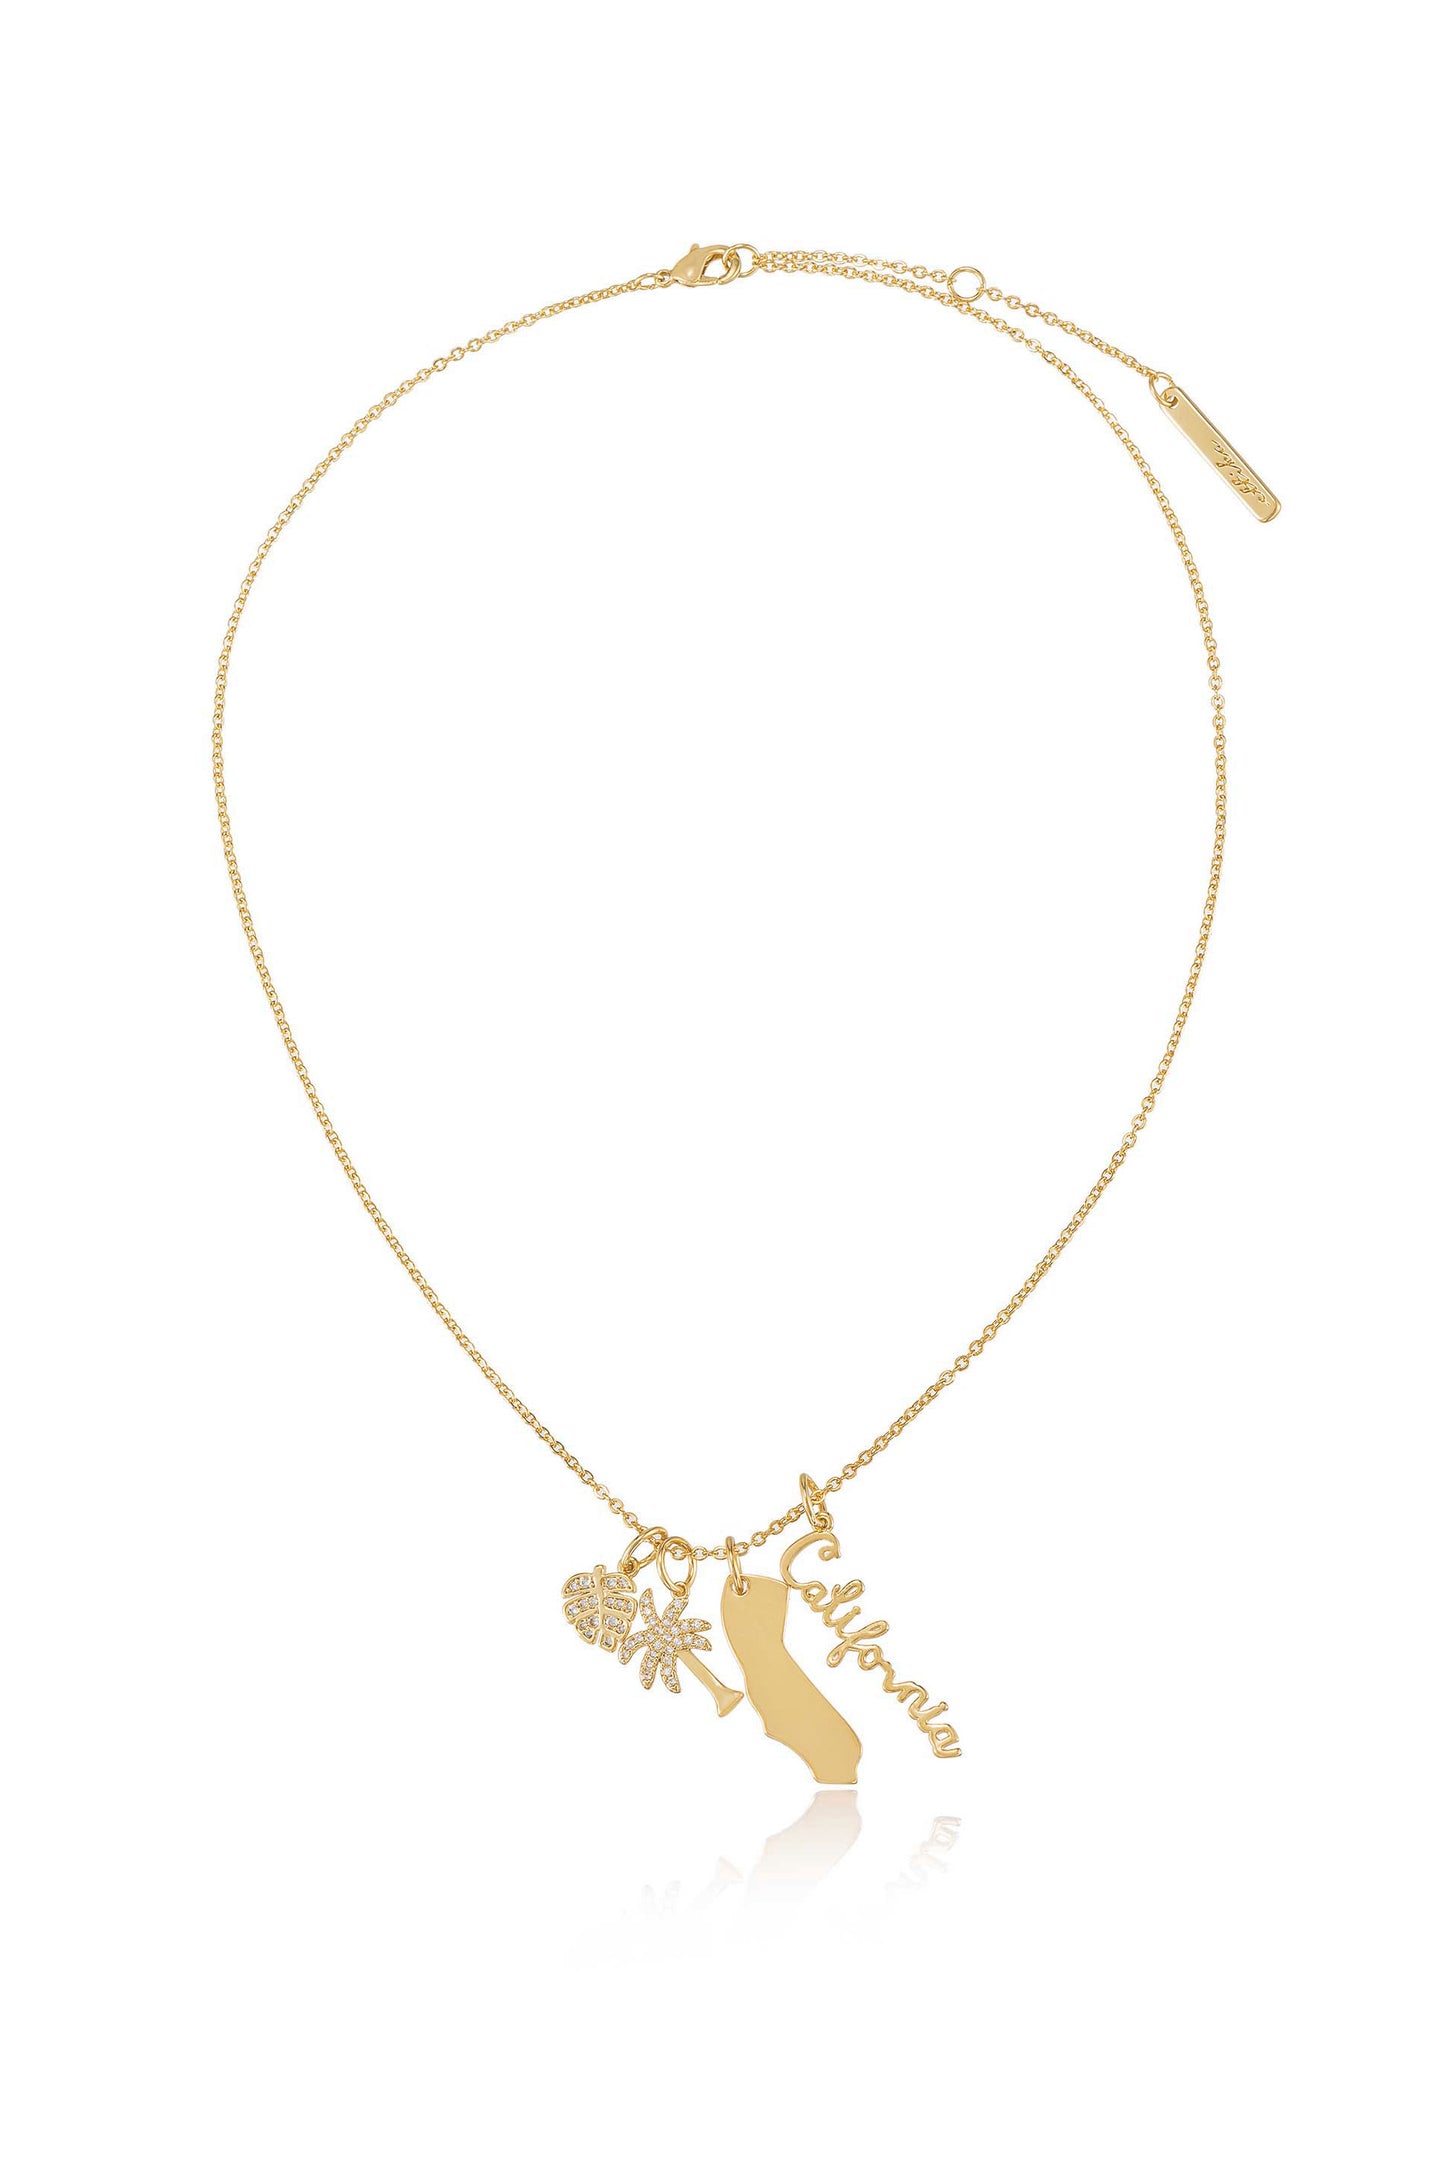 California Cool 18k Gold Plated Interchangeable Charm Necklace full